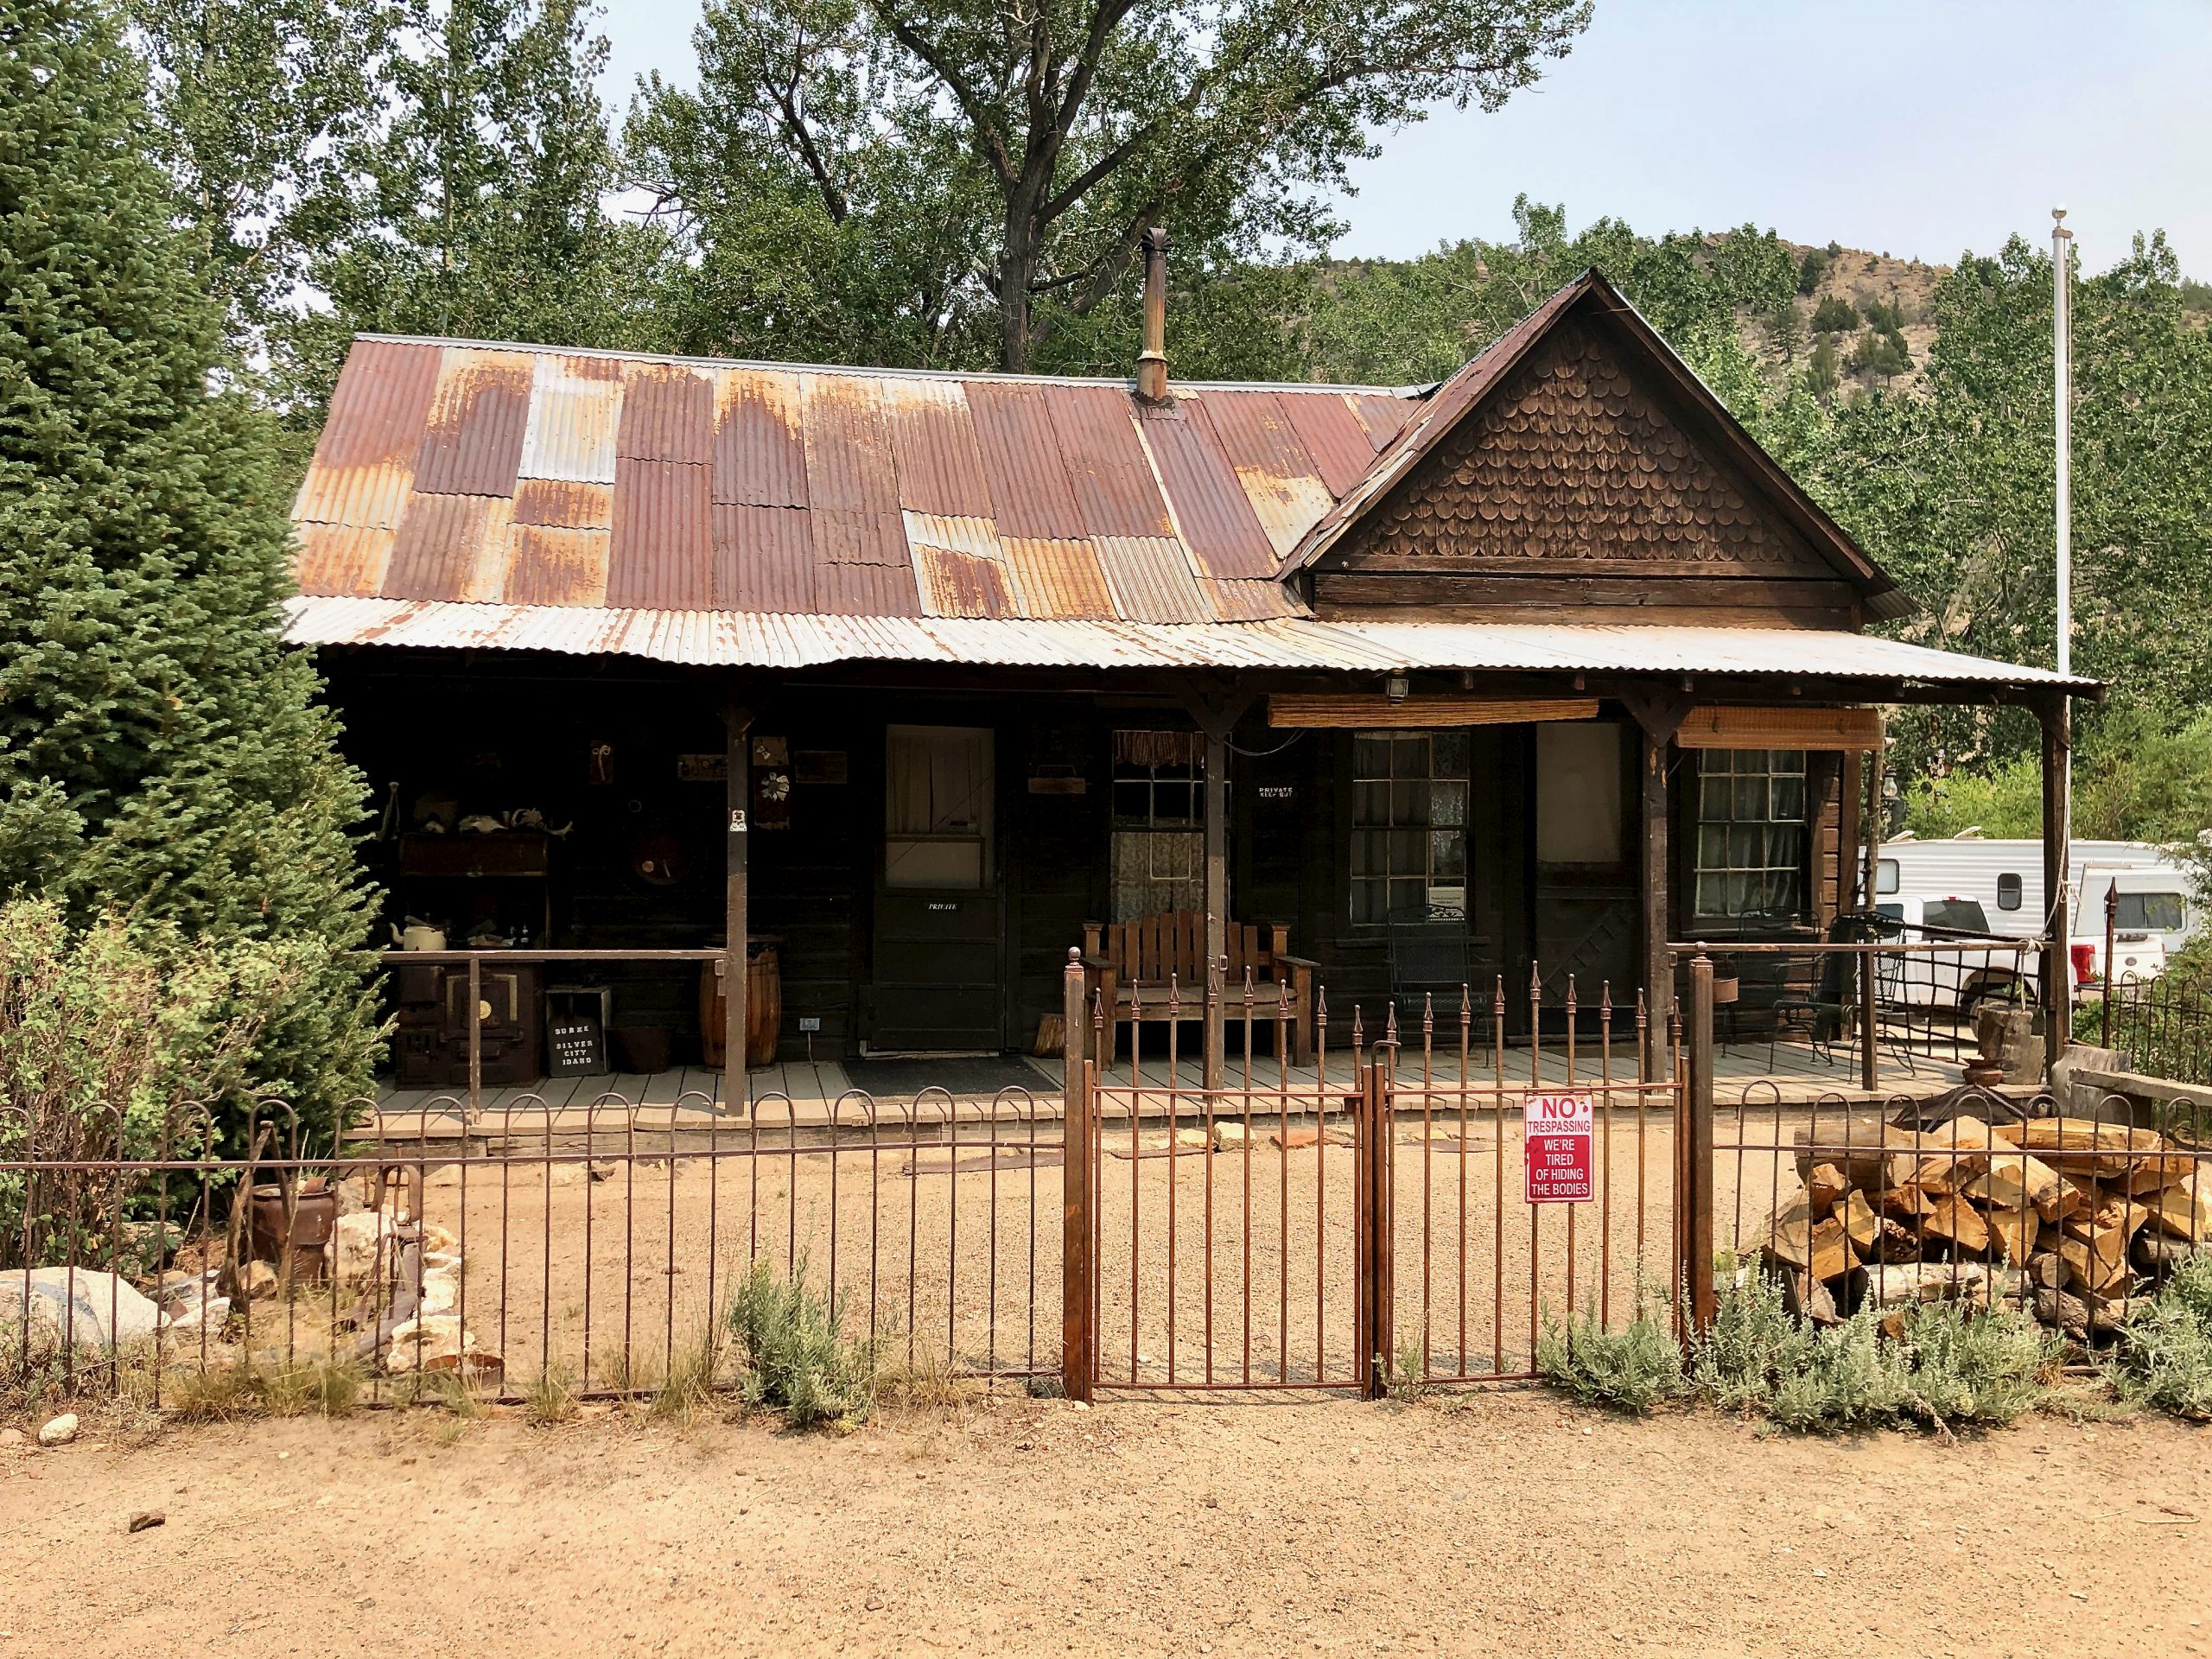 5 Reasons Silver City Is Worth The Drive - Tali's Tiny Treasures